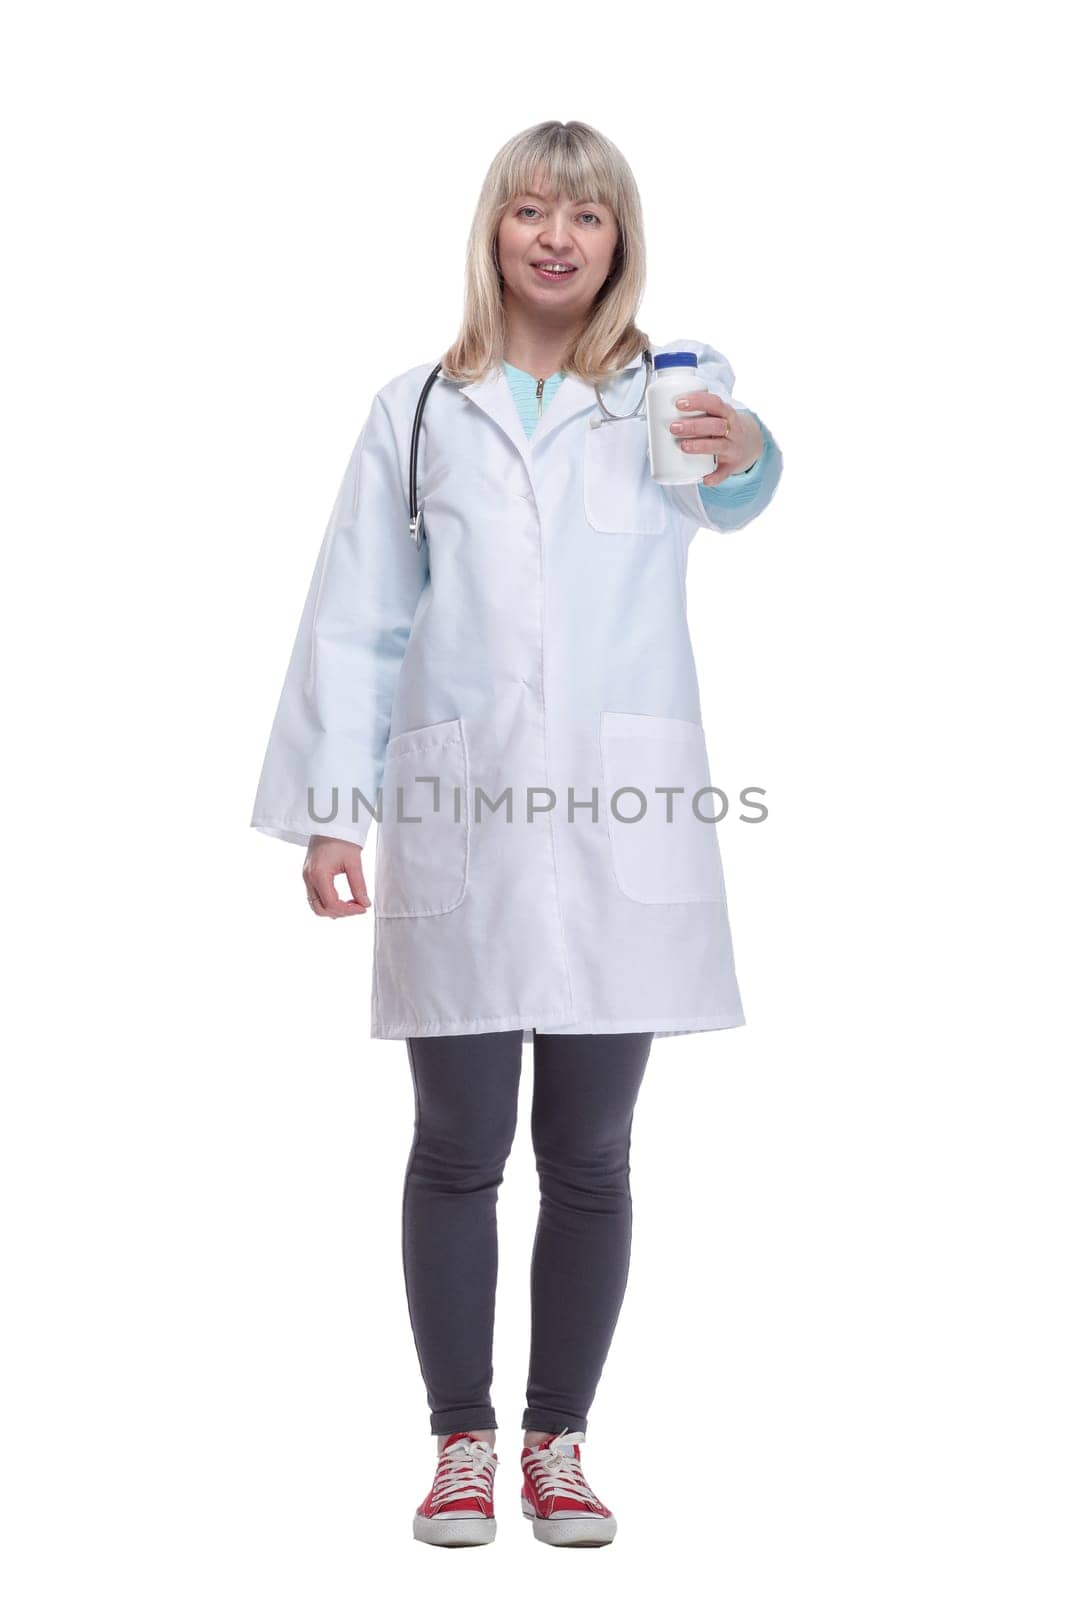 in full growth. smiling expert doctor with hand antiseptic. isolated on a white background.